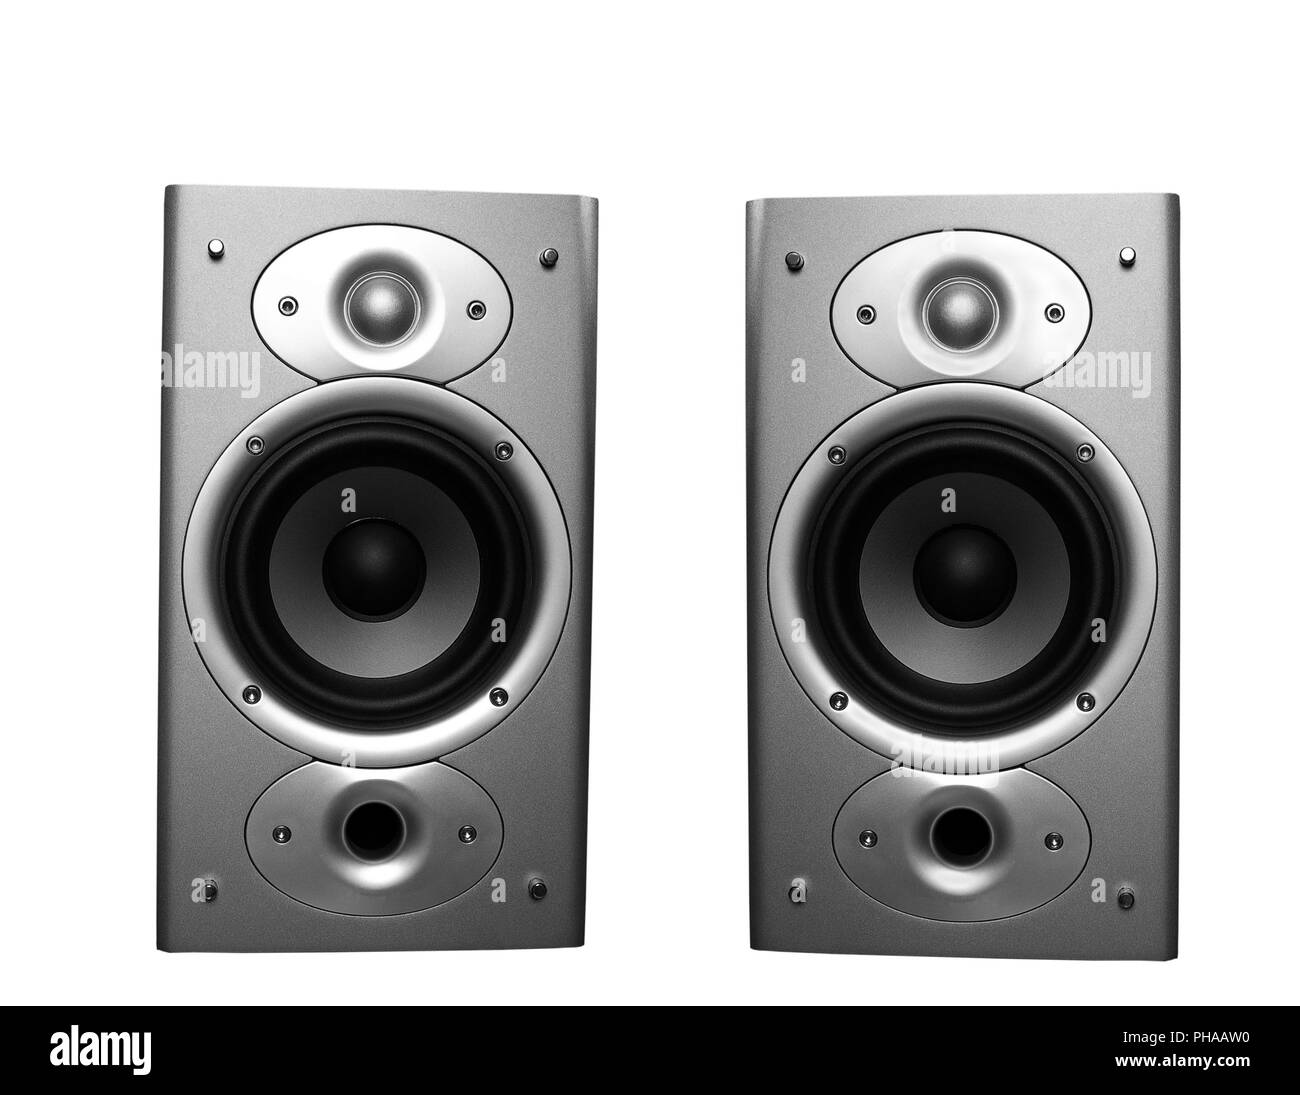 Home stereo speakers Stock Photo